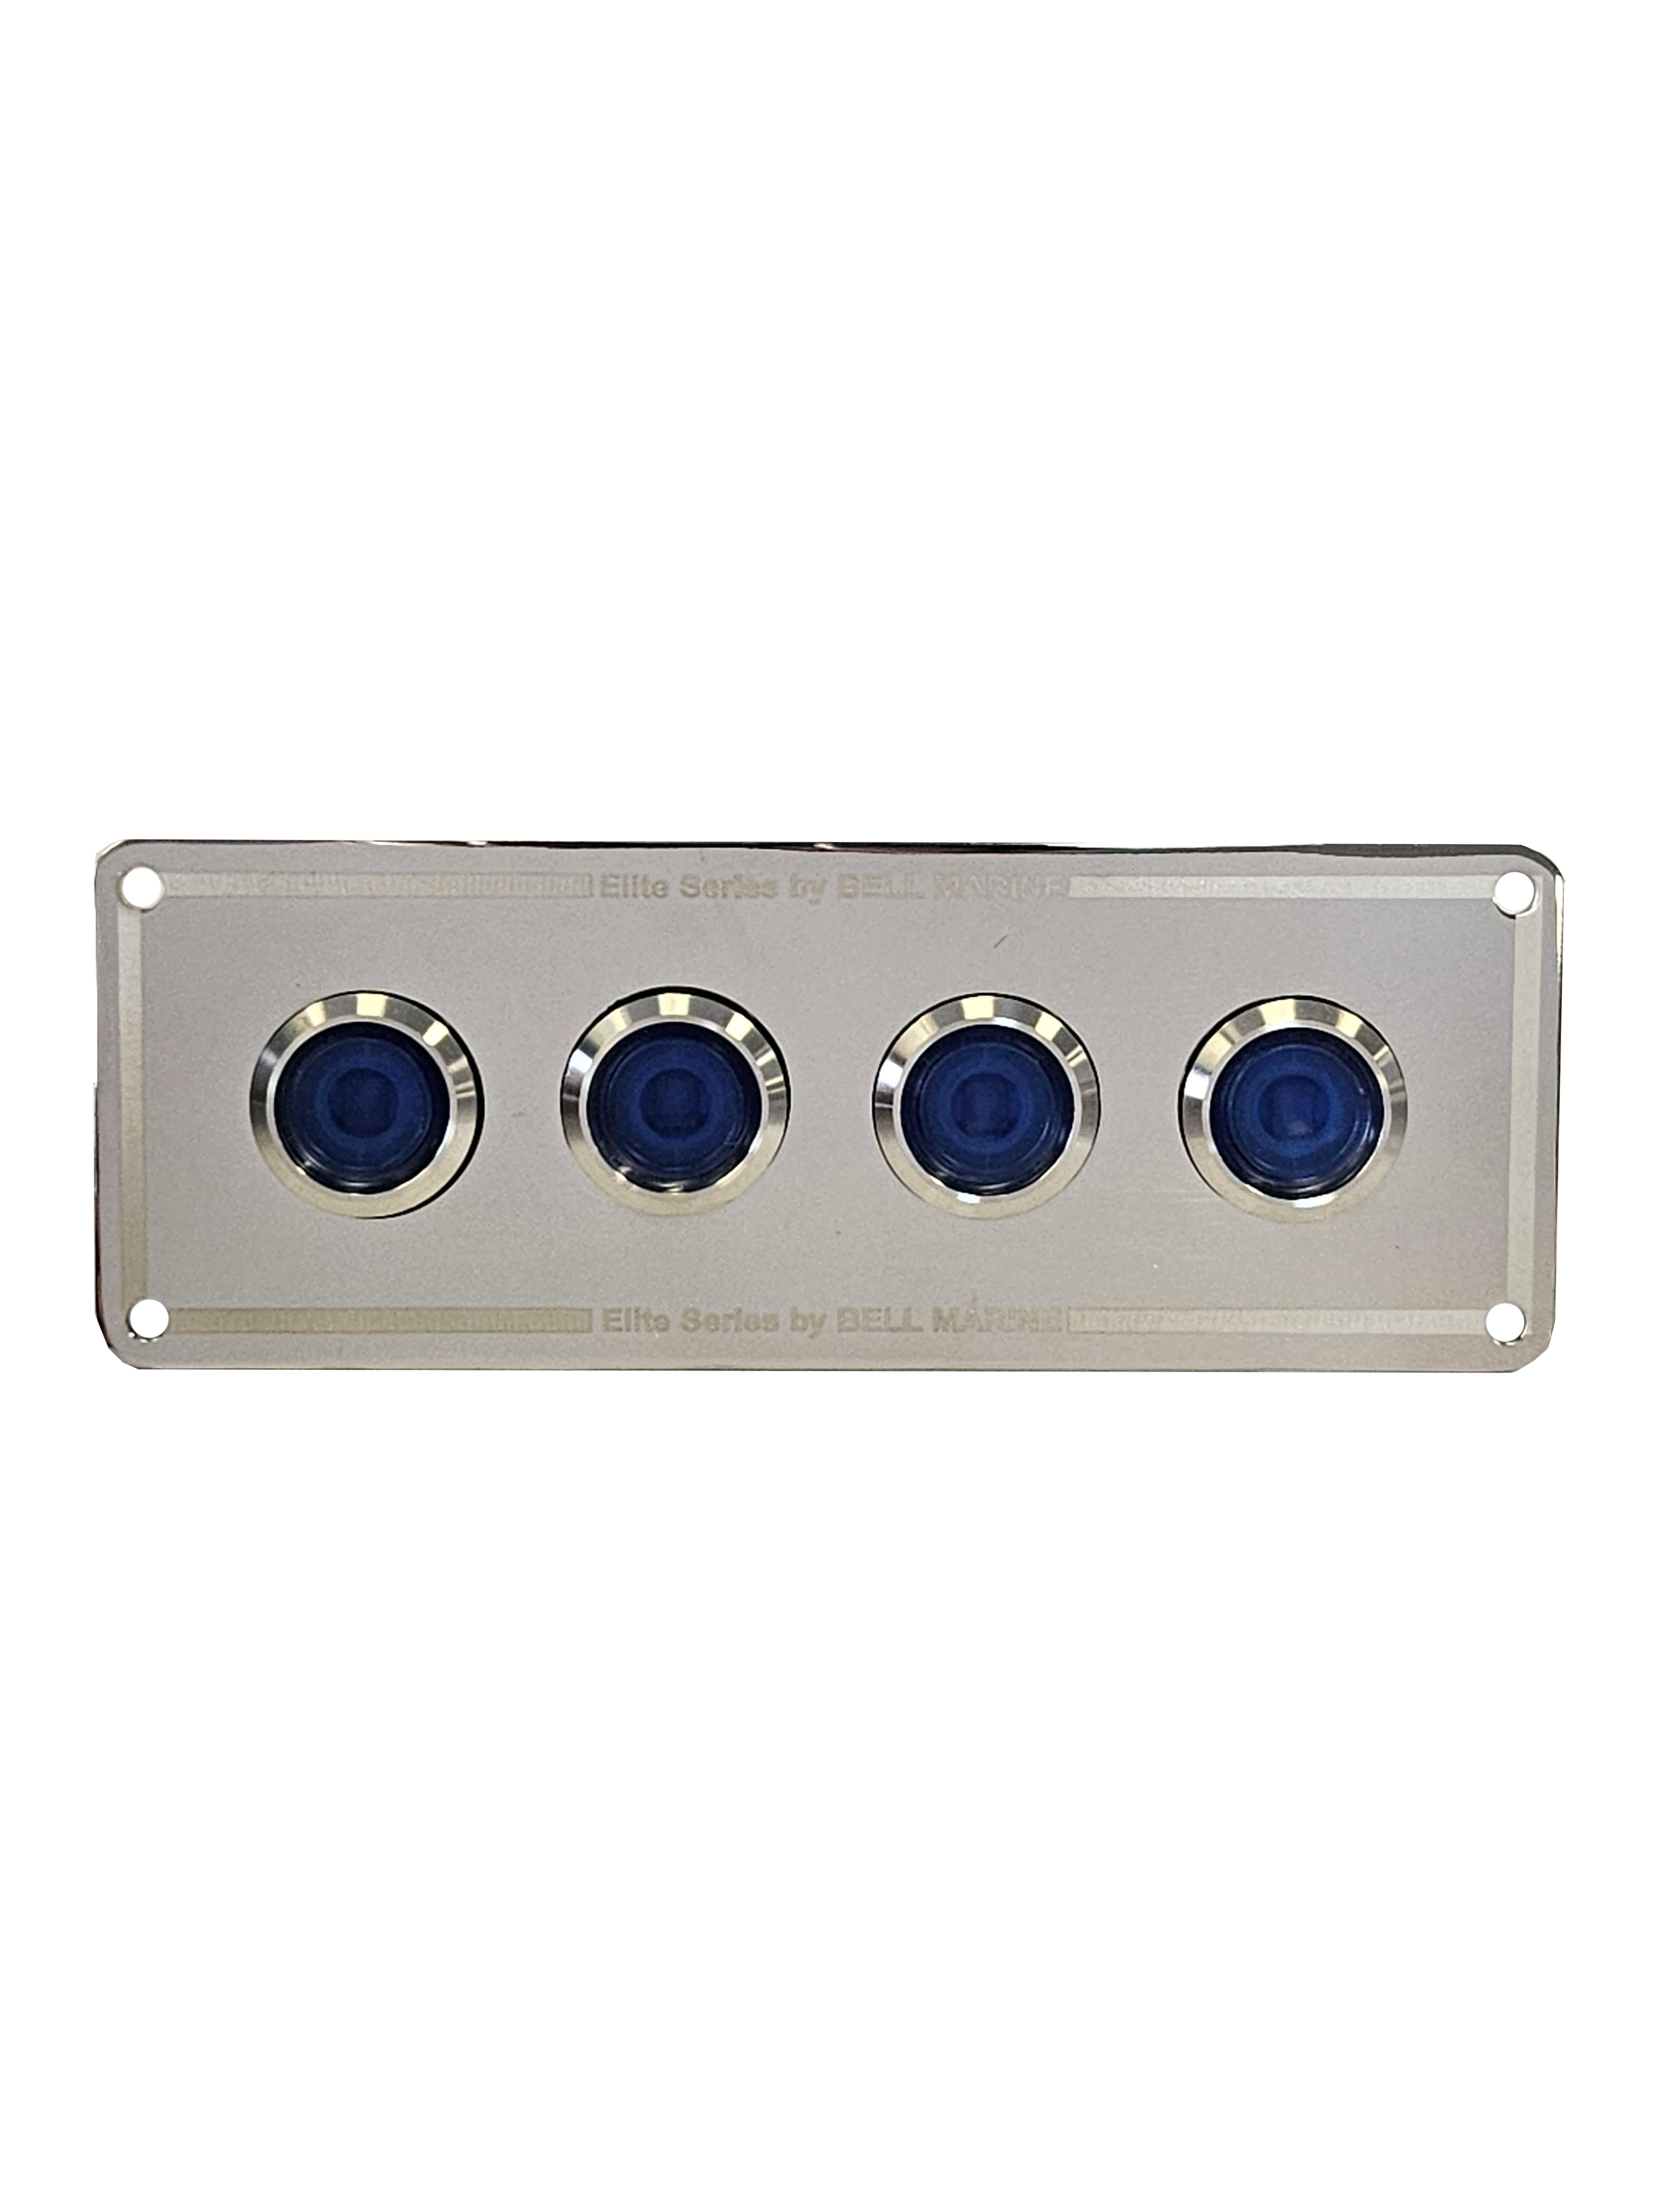 4 gang stainless steel switch panel with 15A backlit switches